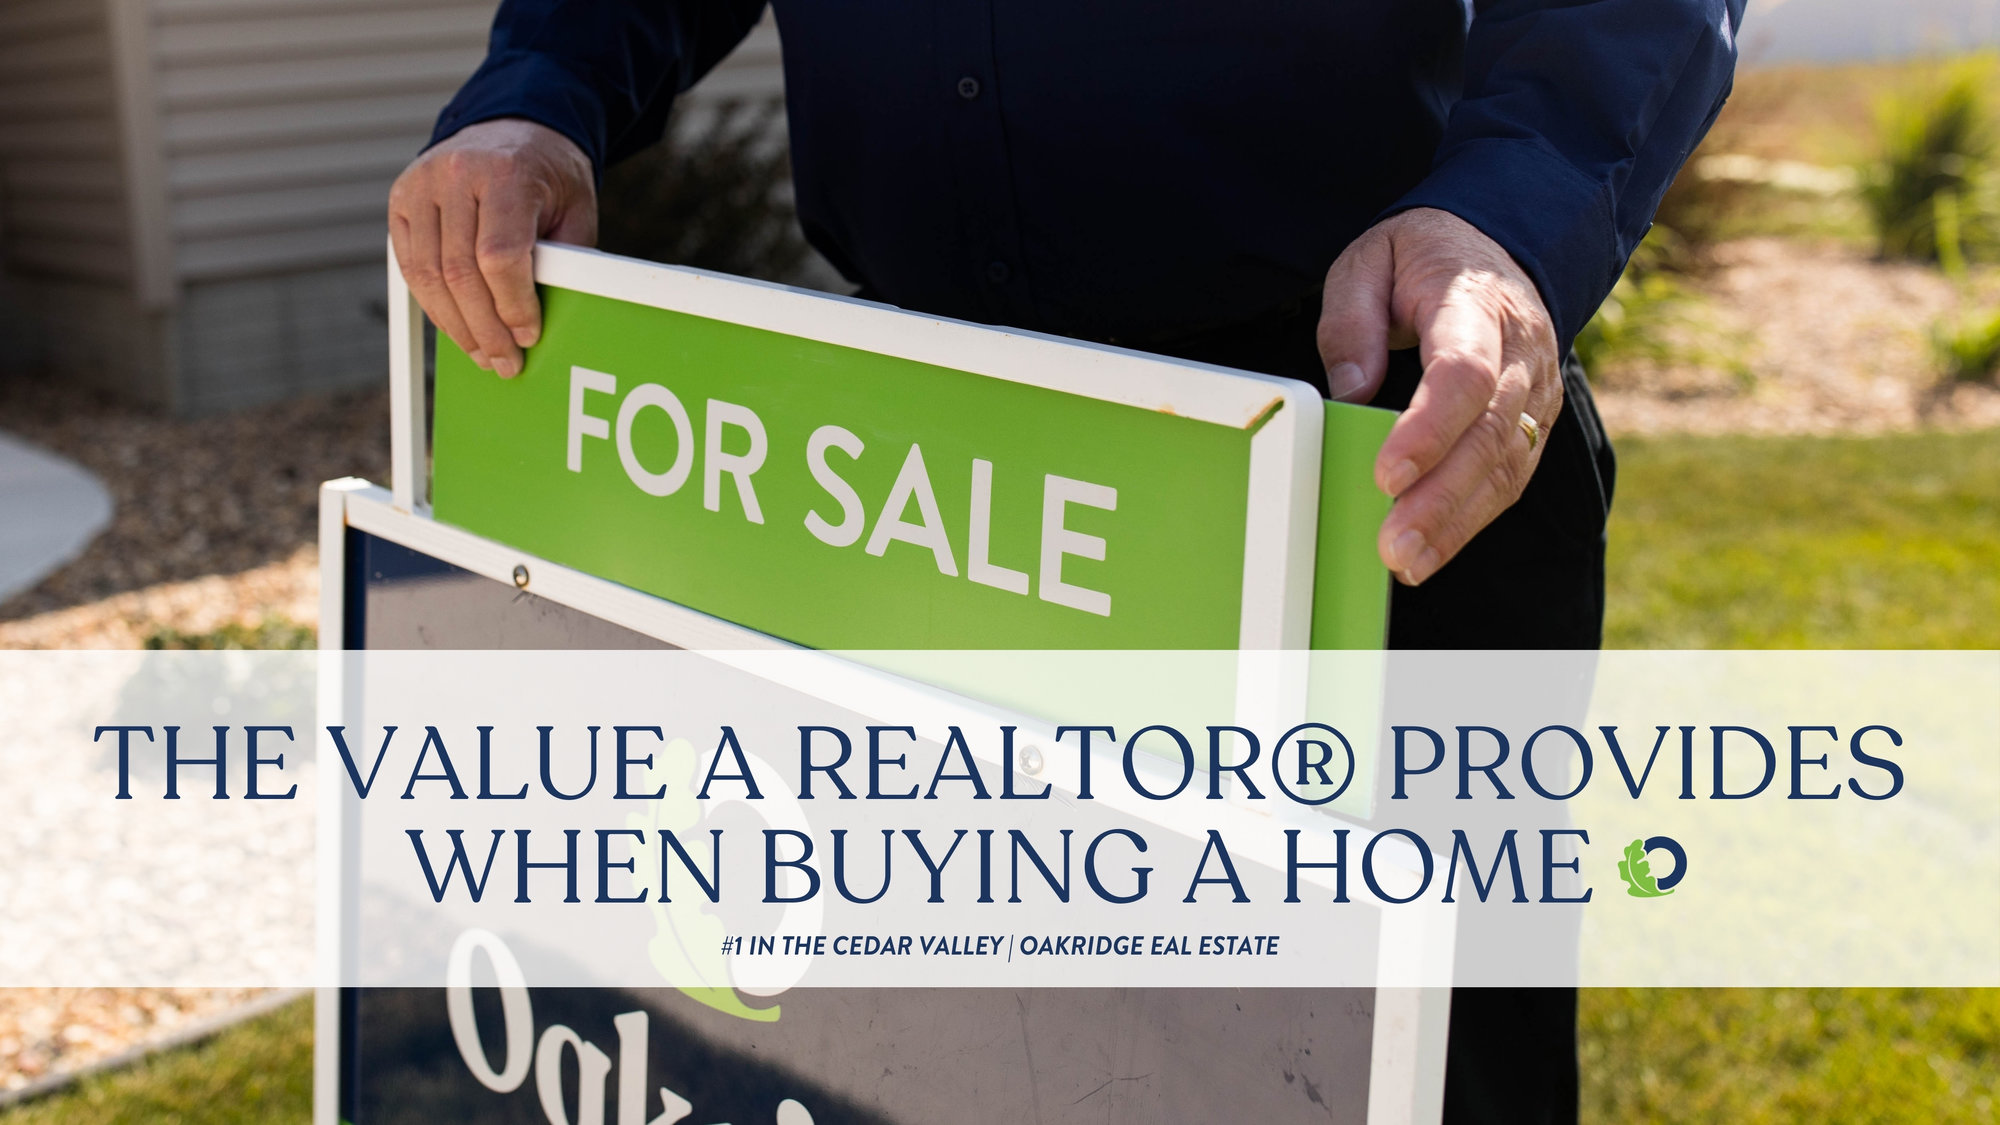 The value a realtor provides when buying a home